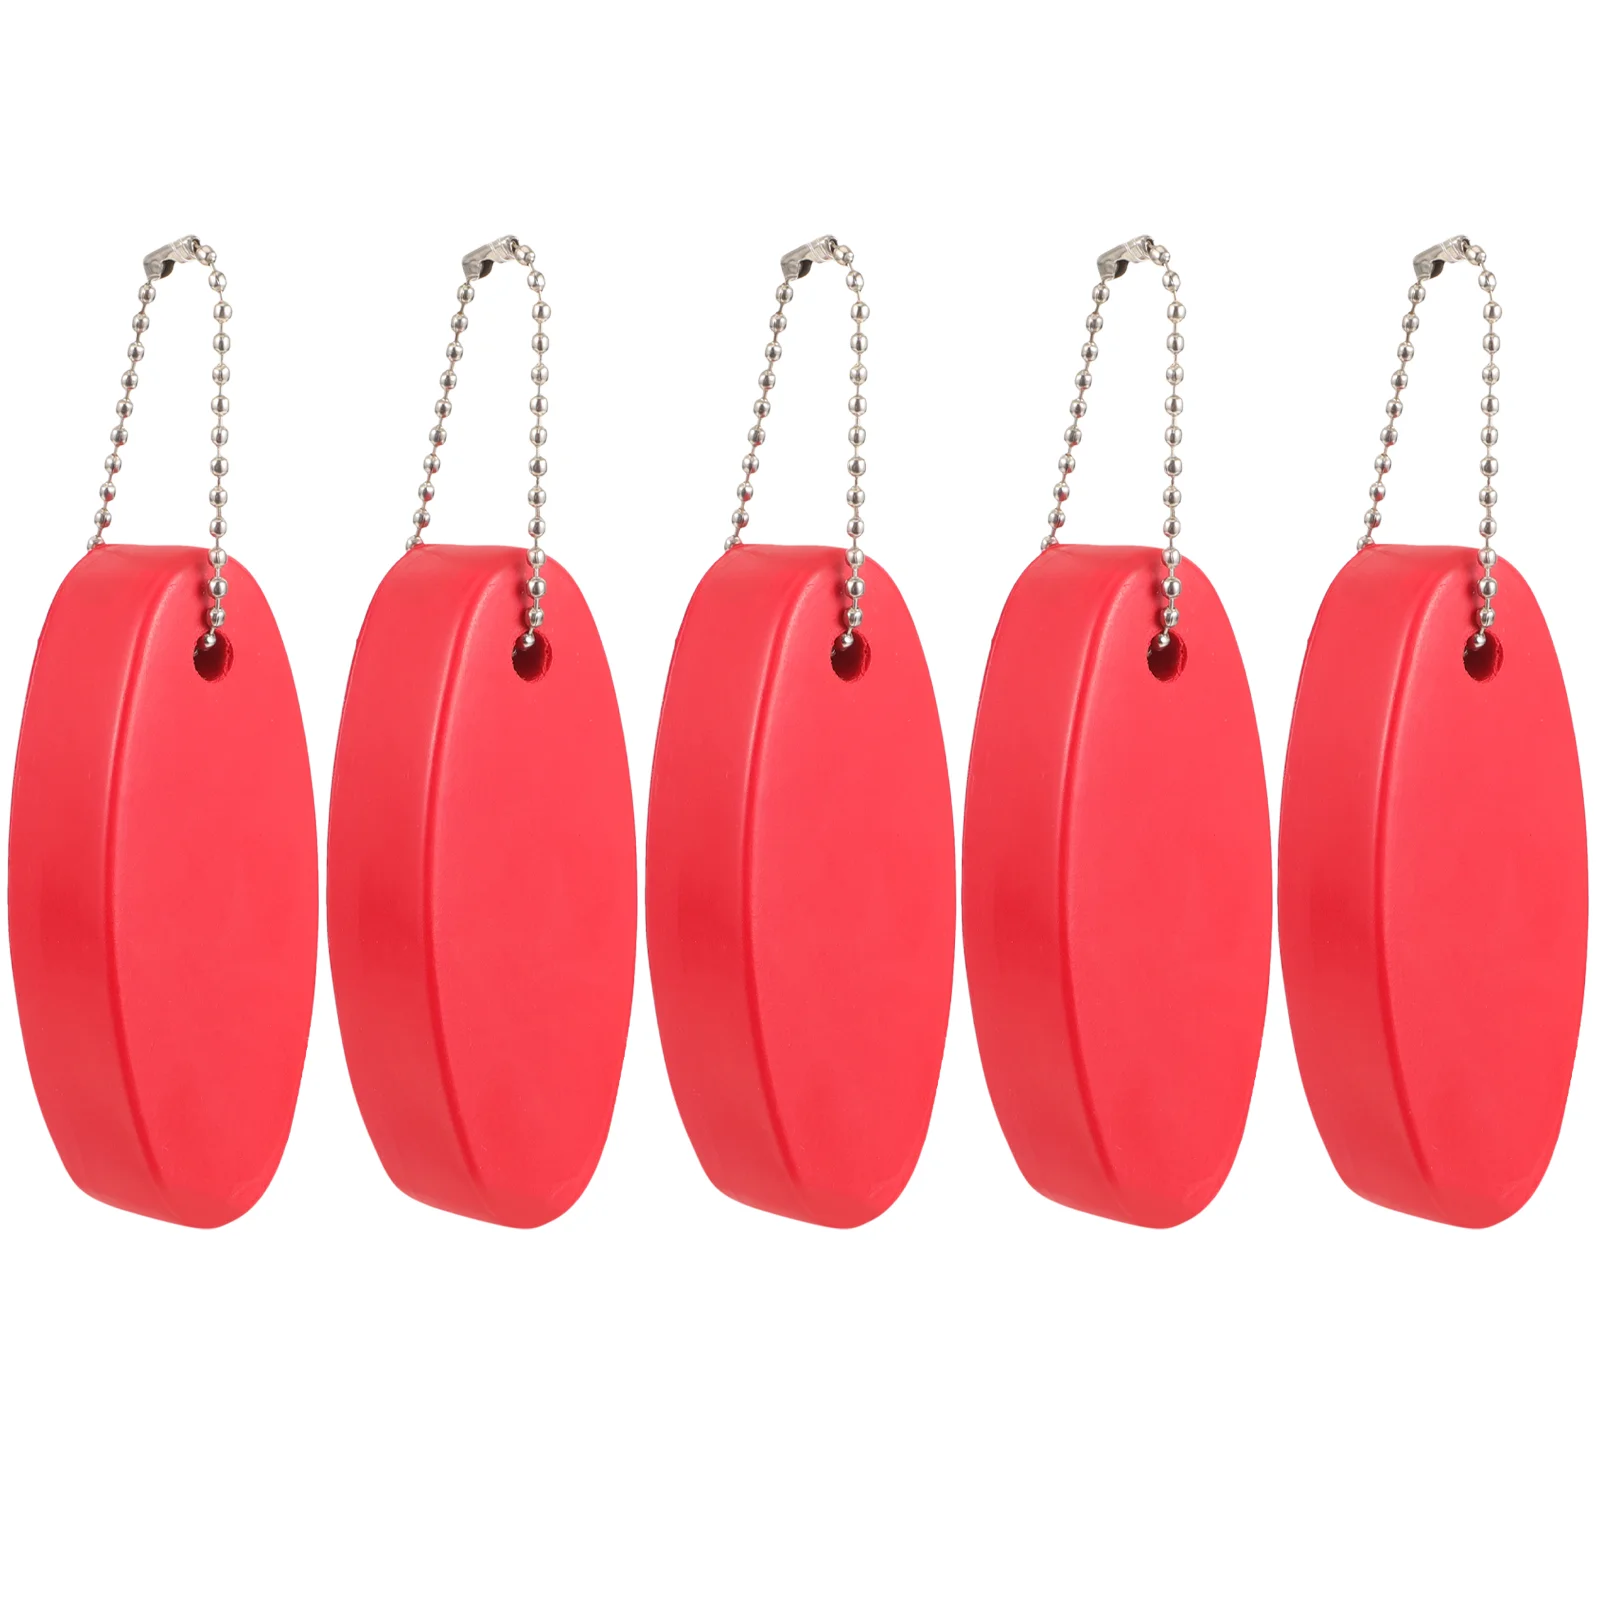 5Pcs Floating Keychains Colored Floating Key Rings Water Sports Keychains Surfboard Pendant Keychains key rings small keychain pendant hot drill keychains for bag sports pendants party favors alloy